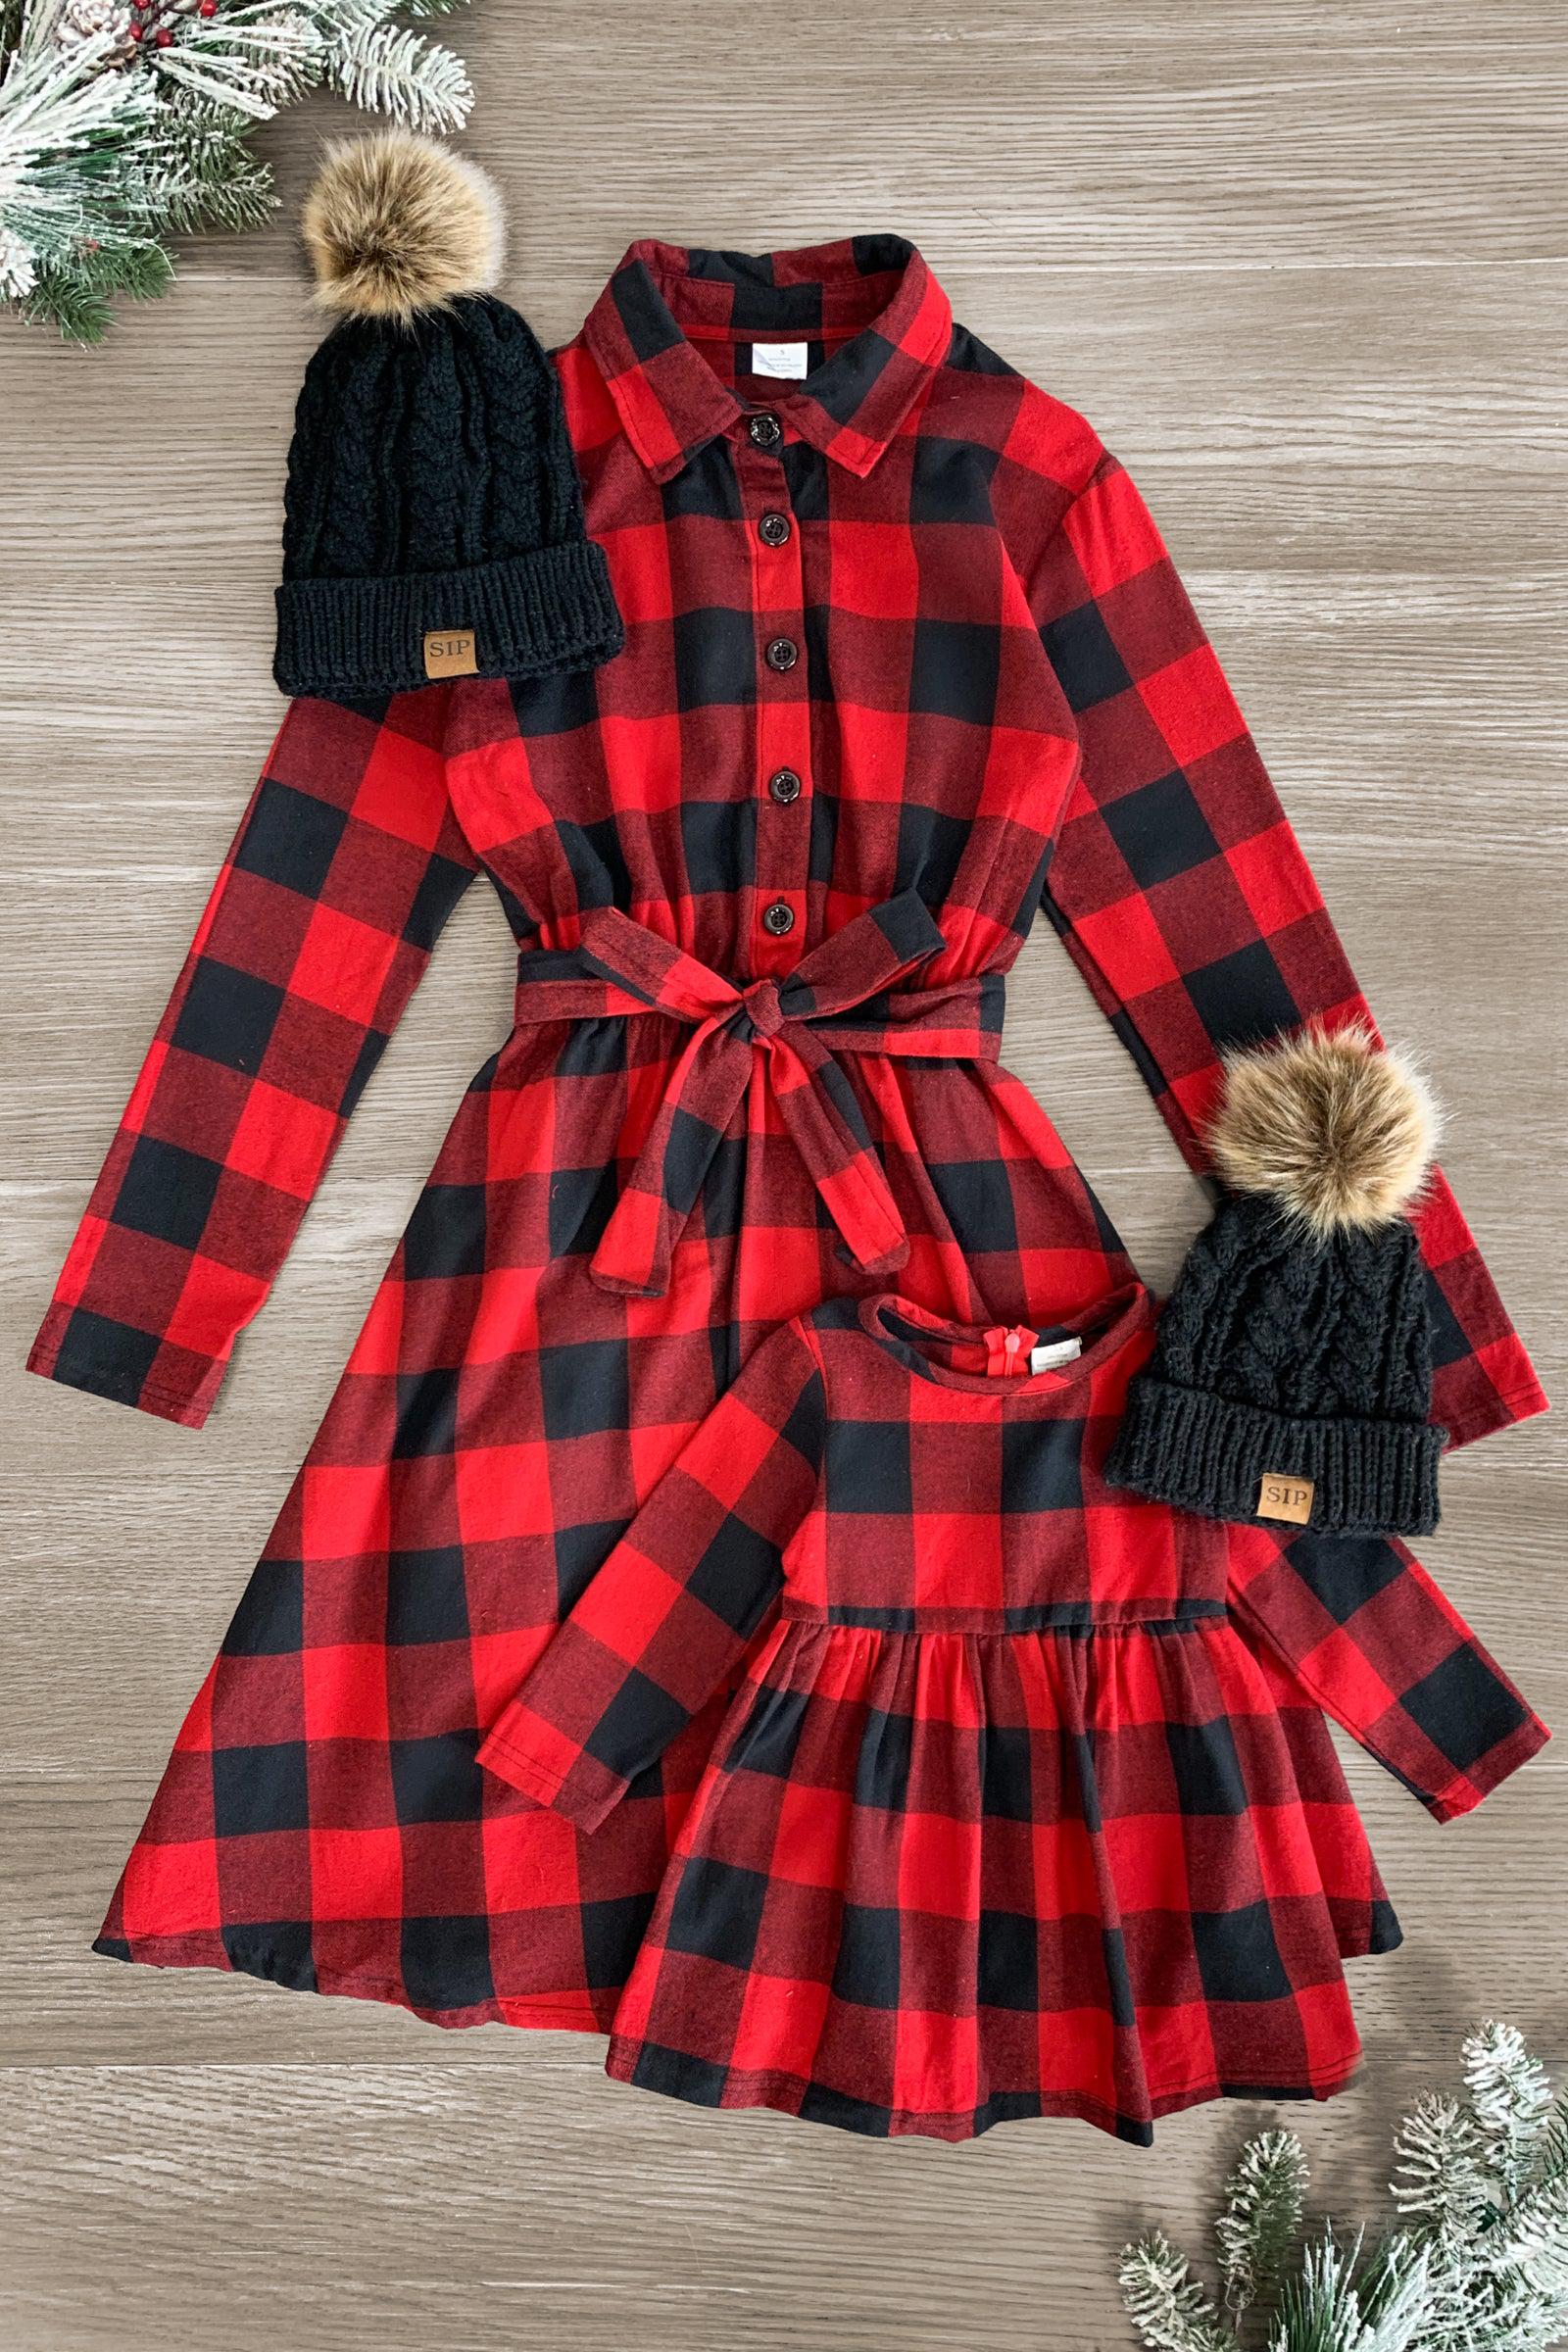 Mom & Me - Red & Black Plaid Dress | Sparkle In Pink